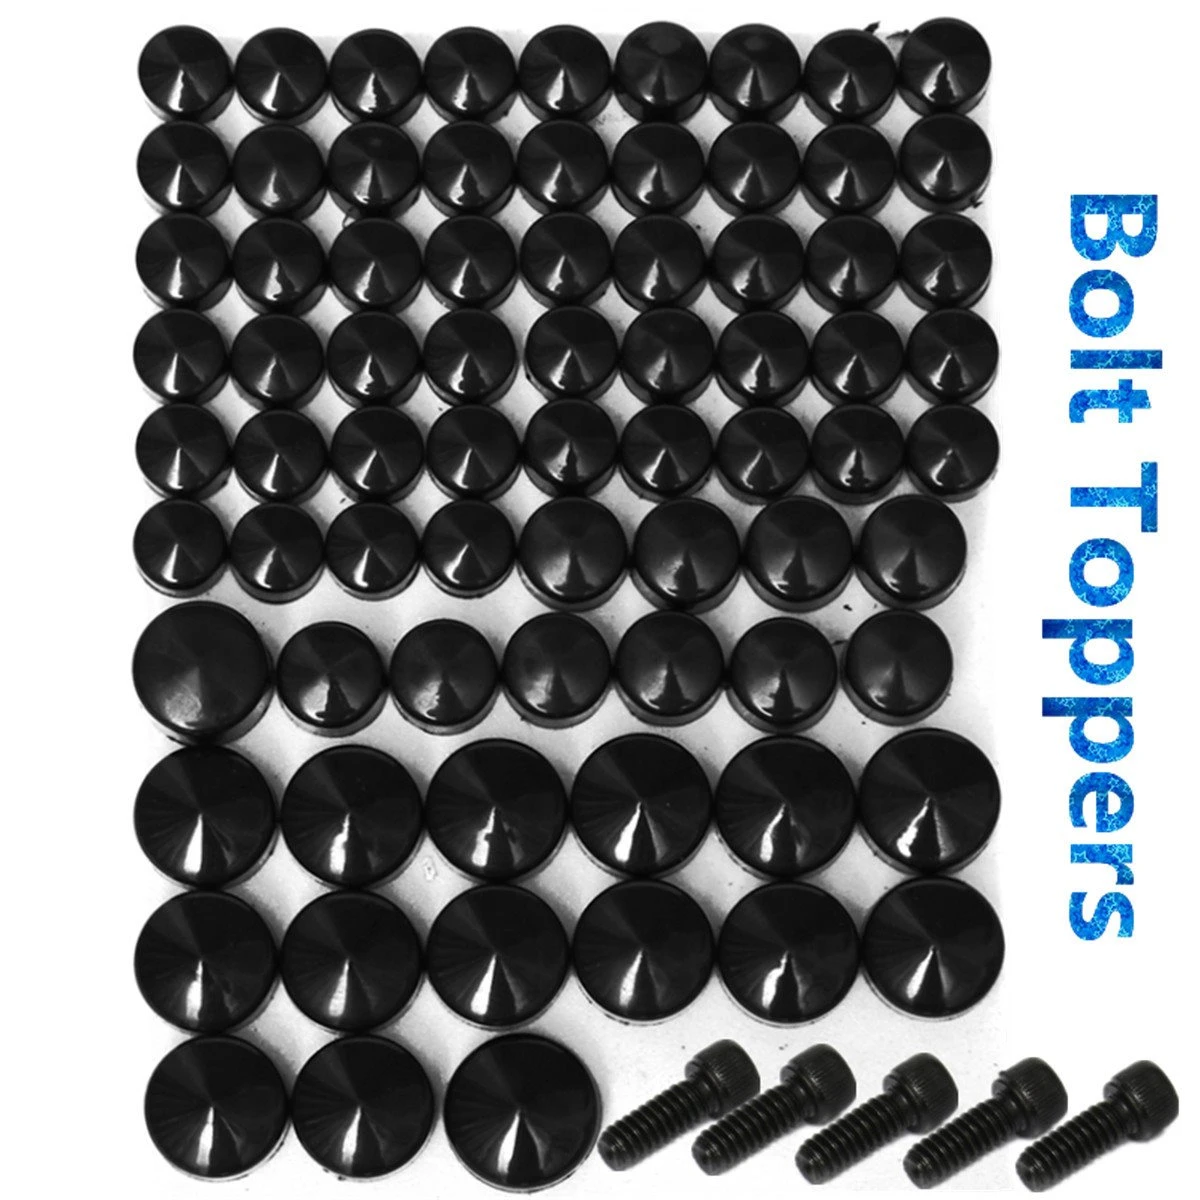 76x Screw Bolt Topper Cap Cover Nut Kit For 91-13 Harley Davidson Twin Cam Dyna